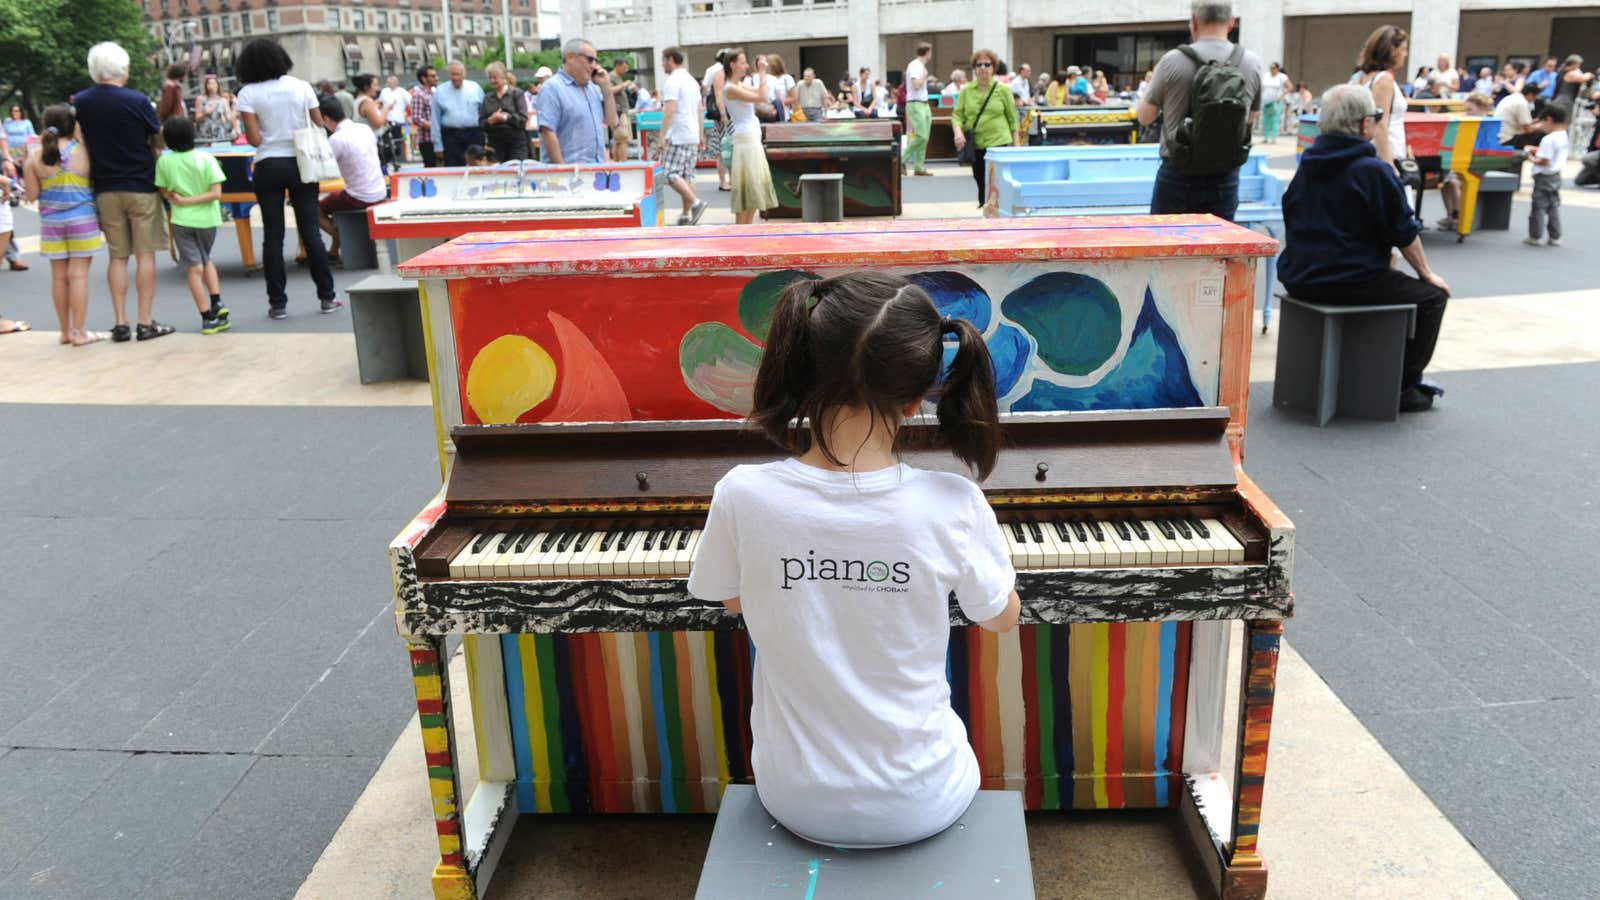 Learning music is children’s play.